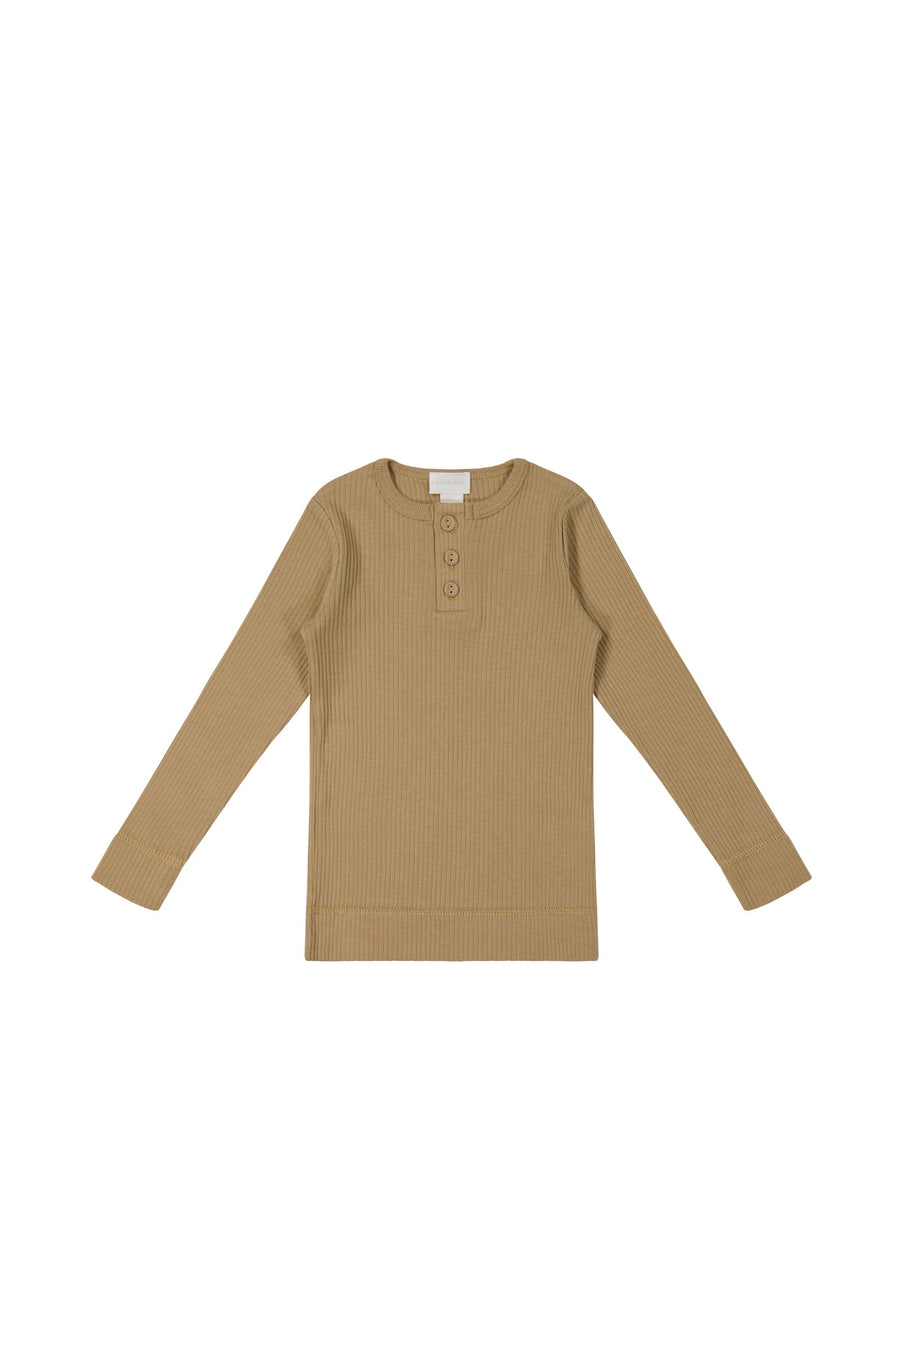 Organic Cotton Modal Long Sleeve Henley - Song Bird Childrens Top from Jamie Kay USA